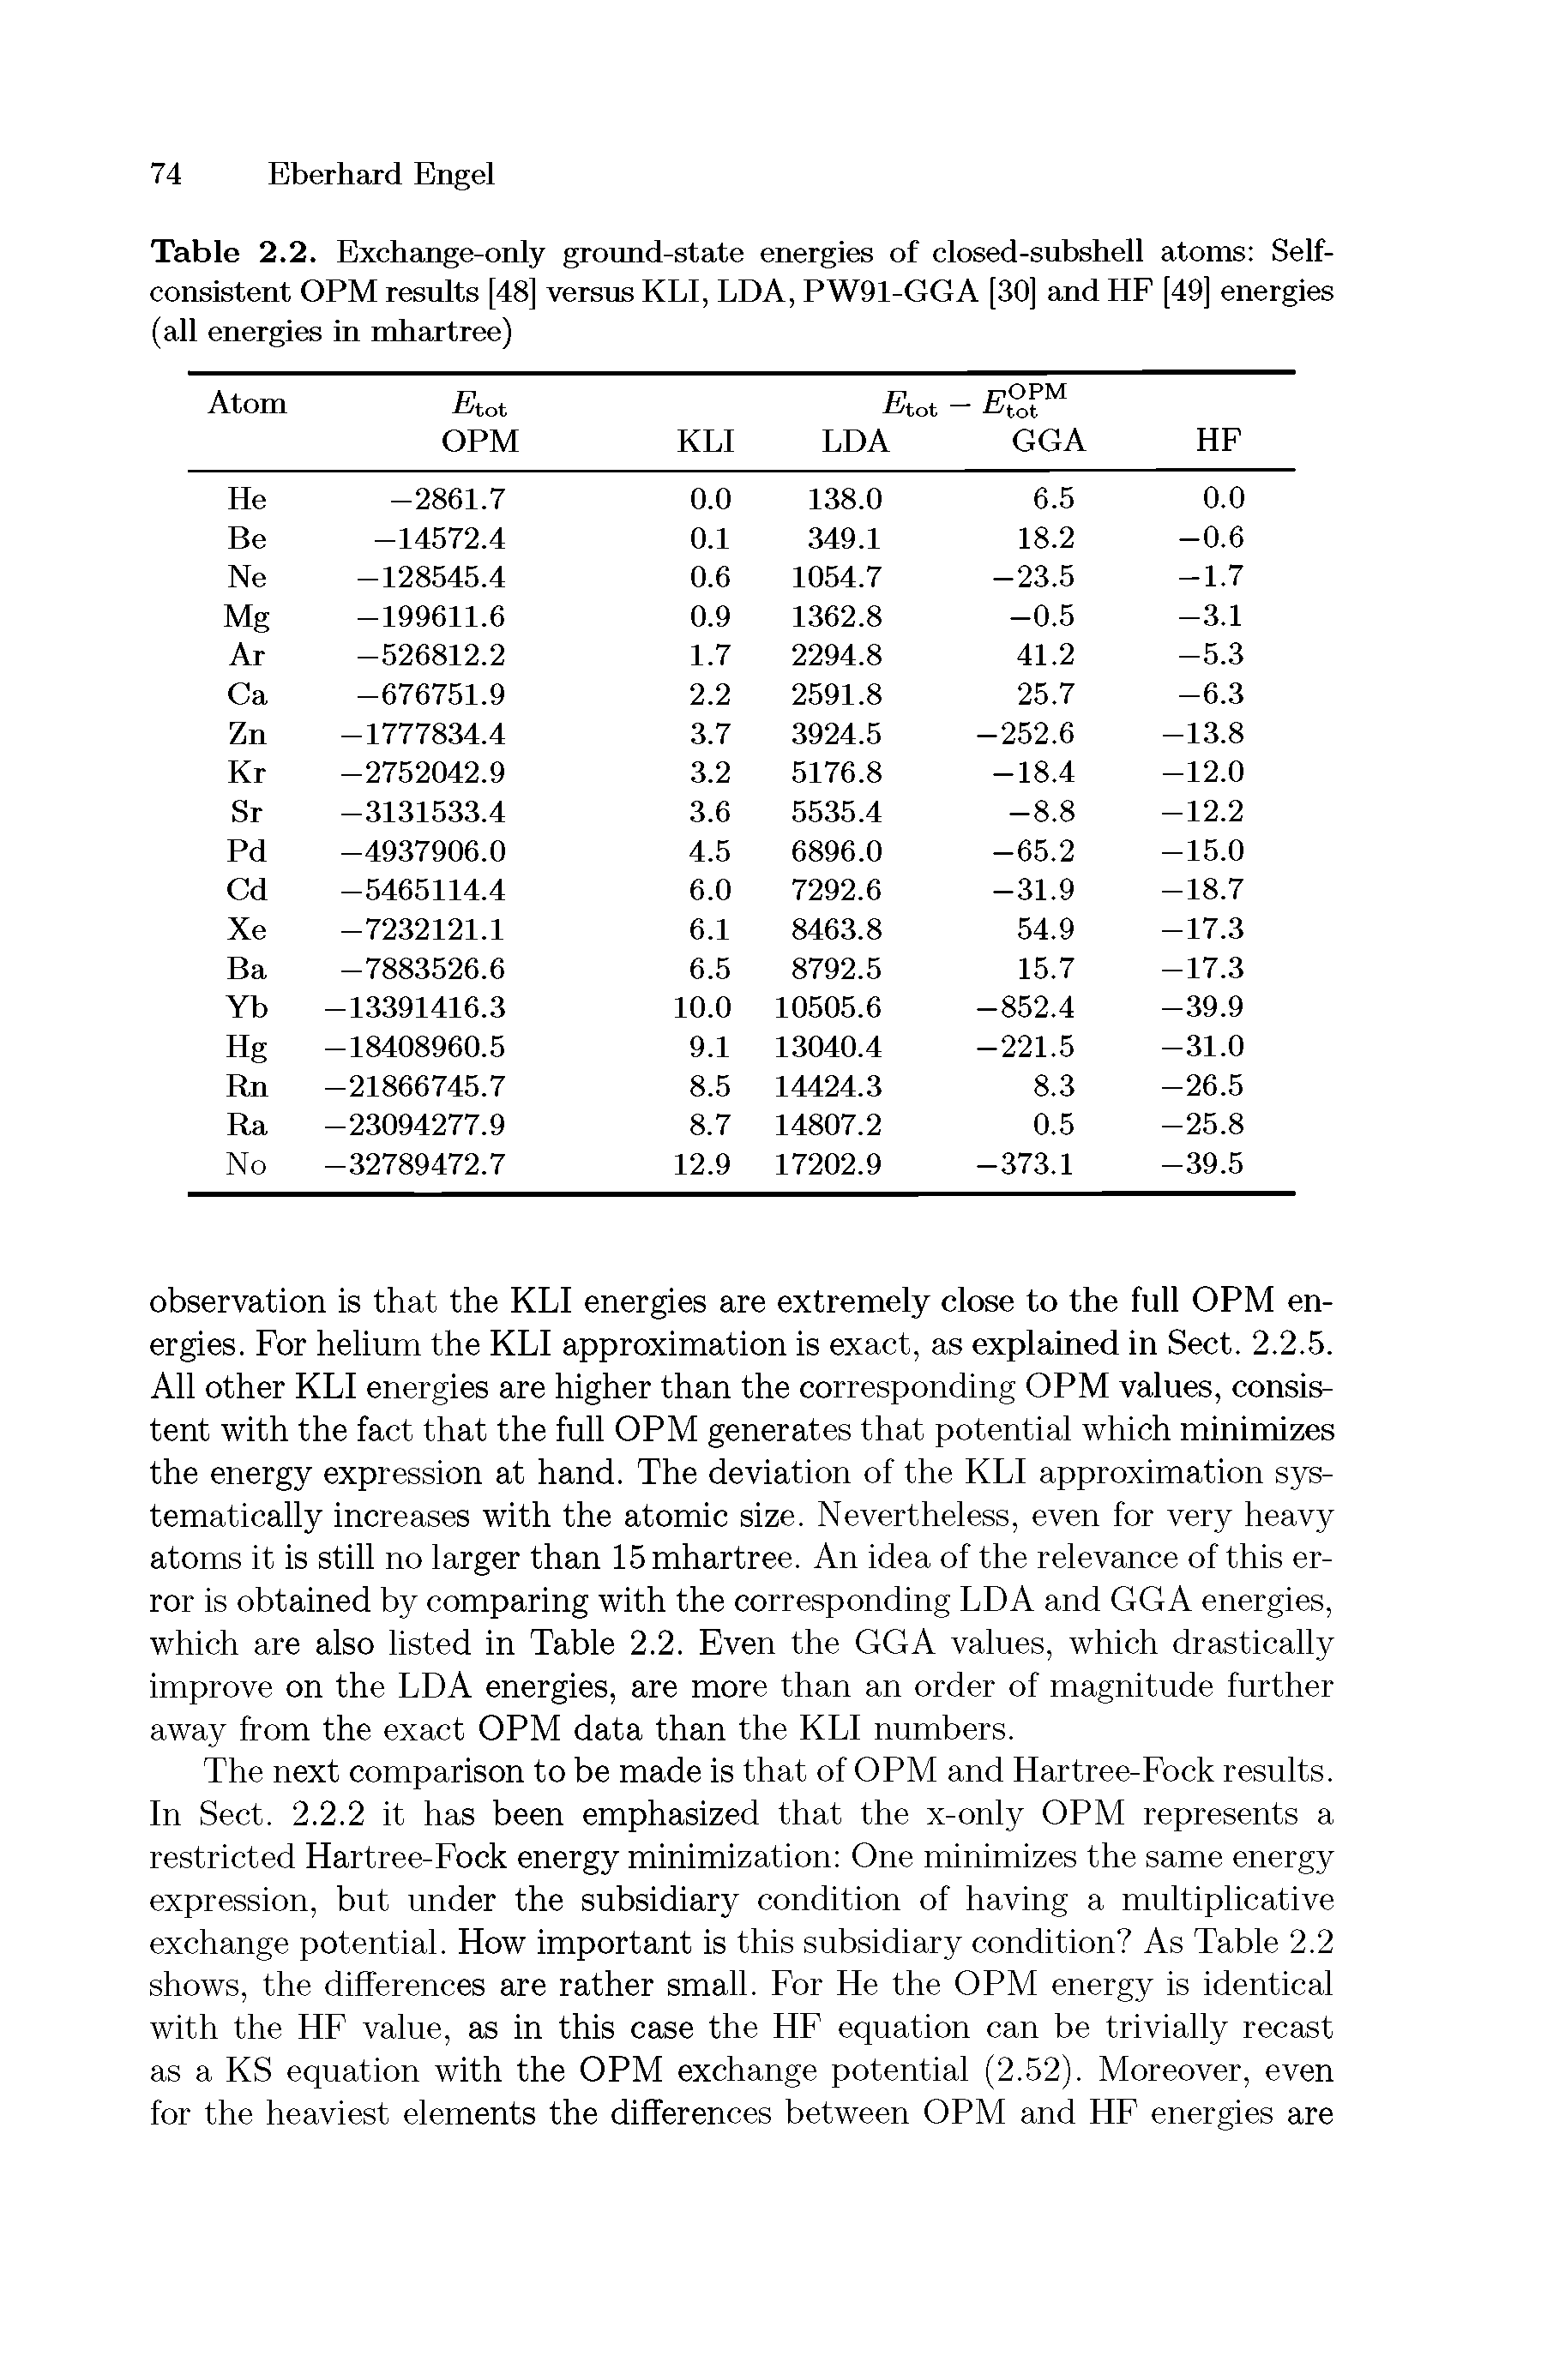 Table 2.2. Exchange-only ground-state energies of closed-subshell atoms Self-consistent OPM results [48] versus KLl, LDA, PW91-GGA [30] and HE [49] energies (all energies in mhartree)...